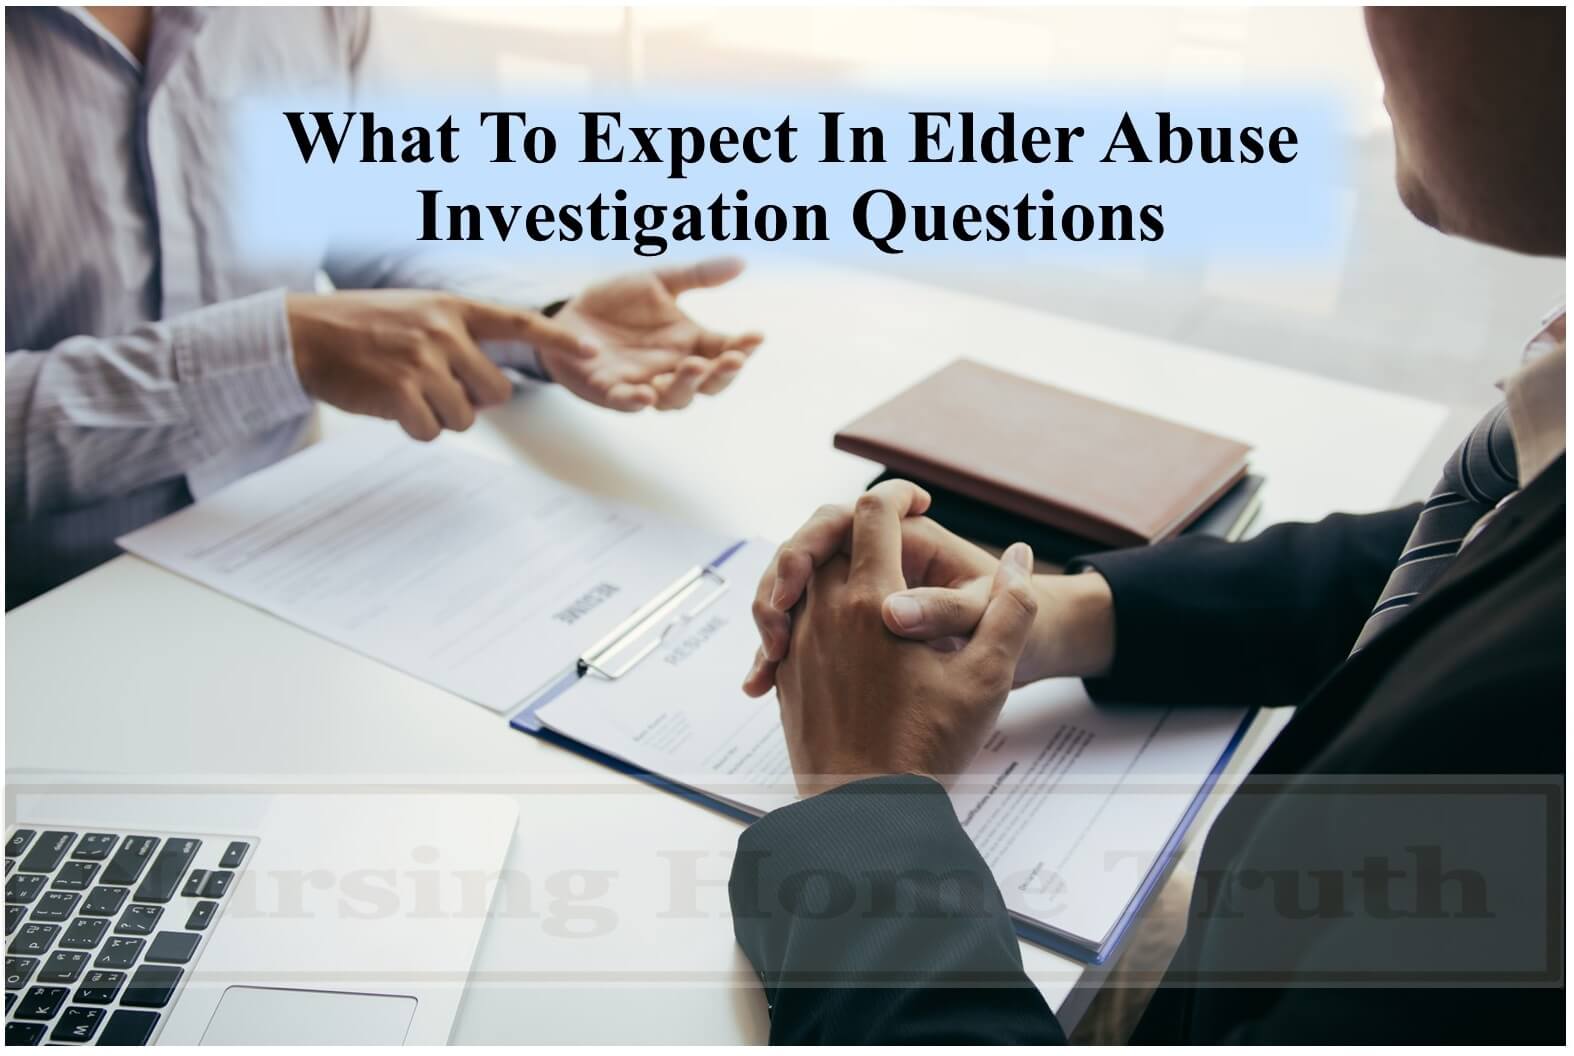 What to expect in elder abuse investigation questions